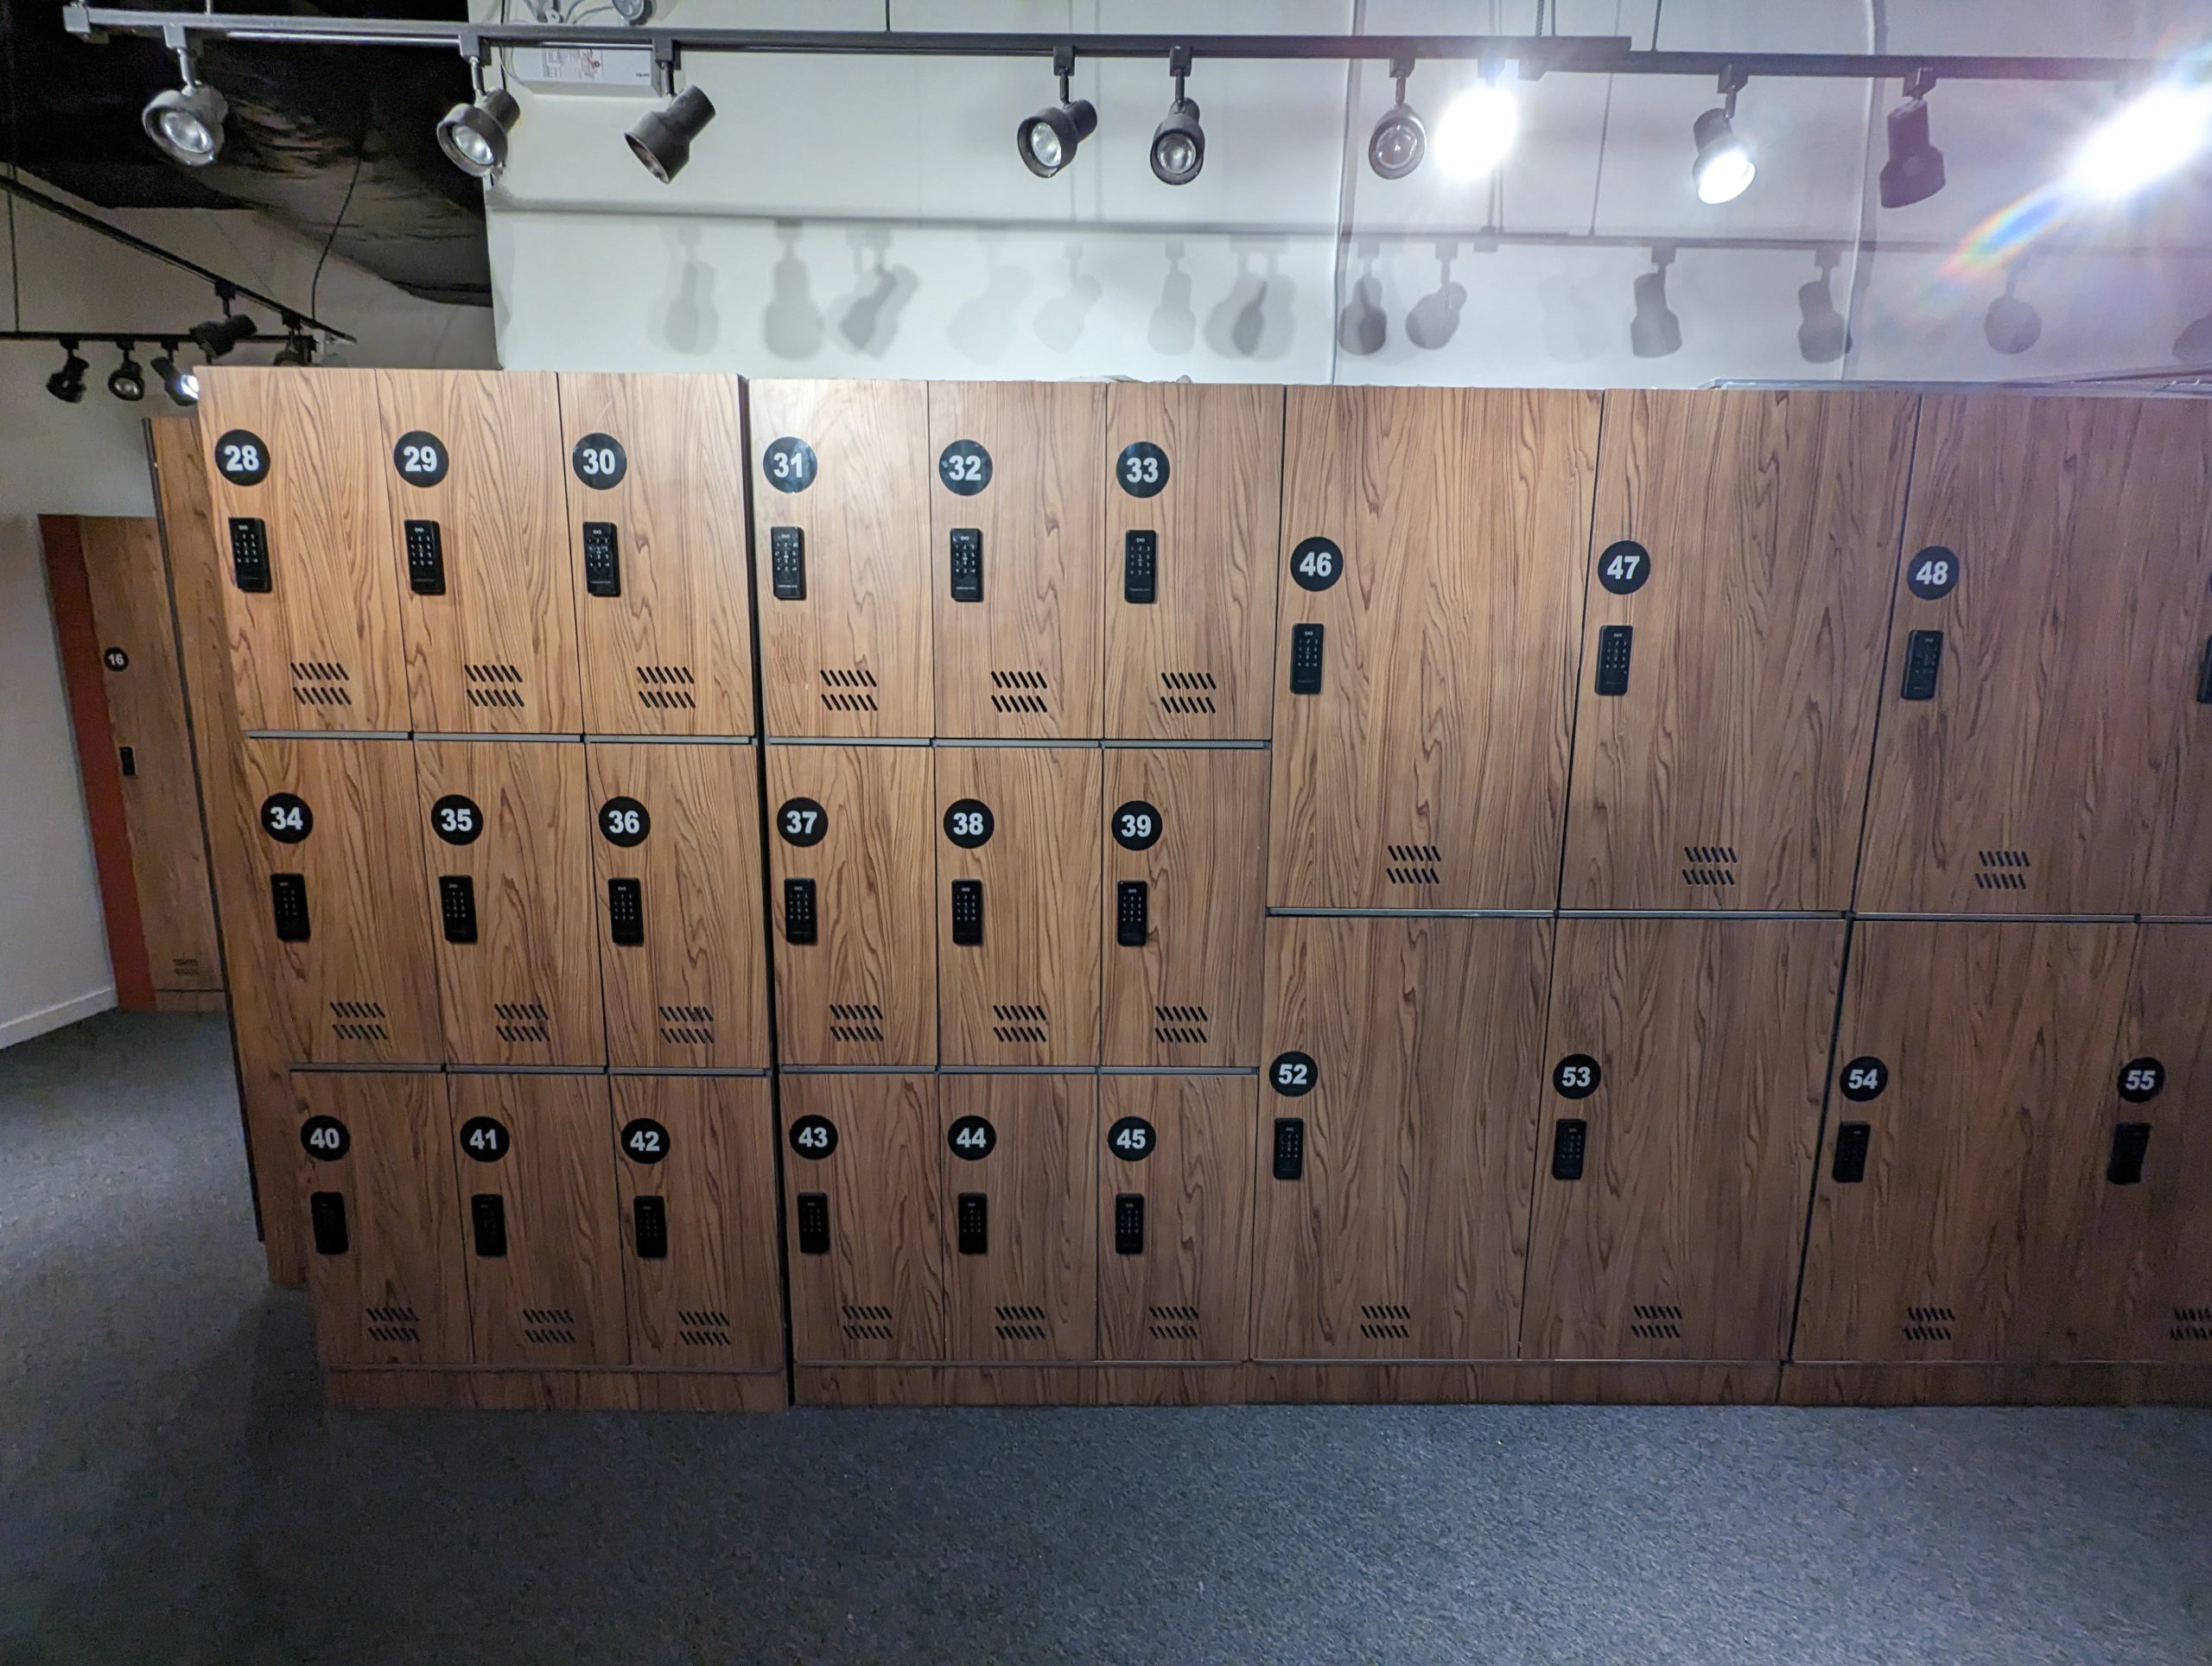 A row of ski lockers in a room.